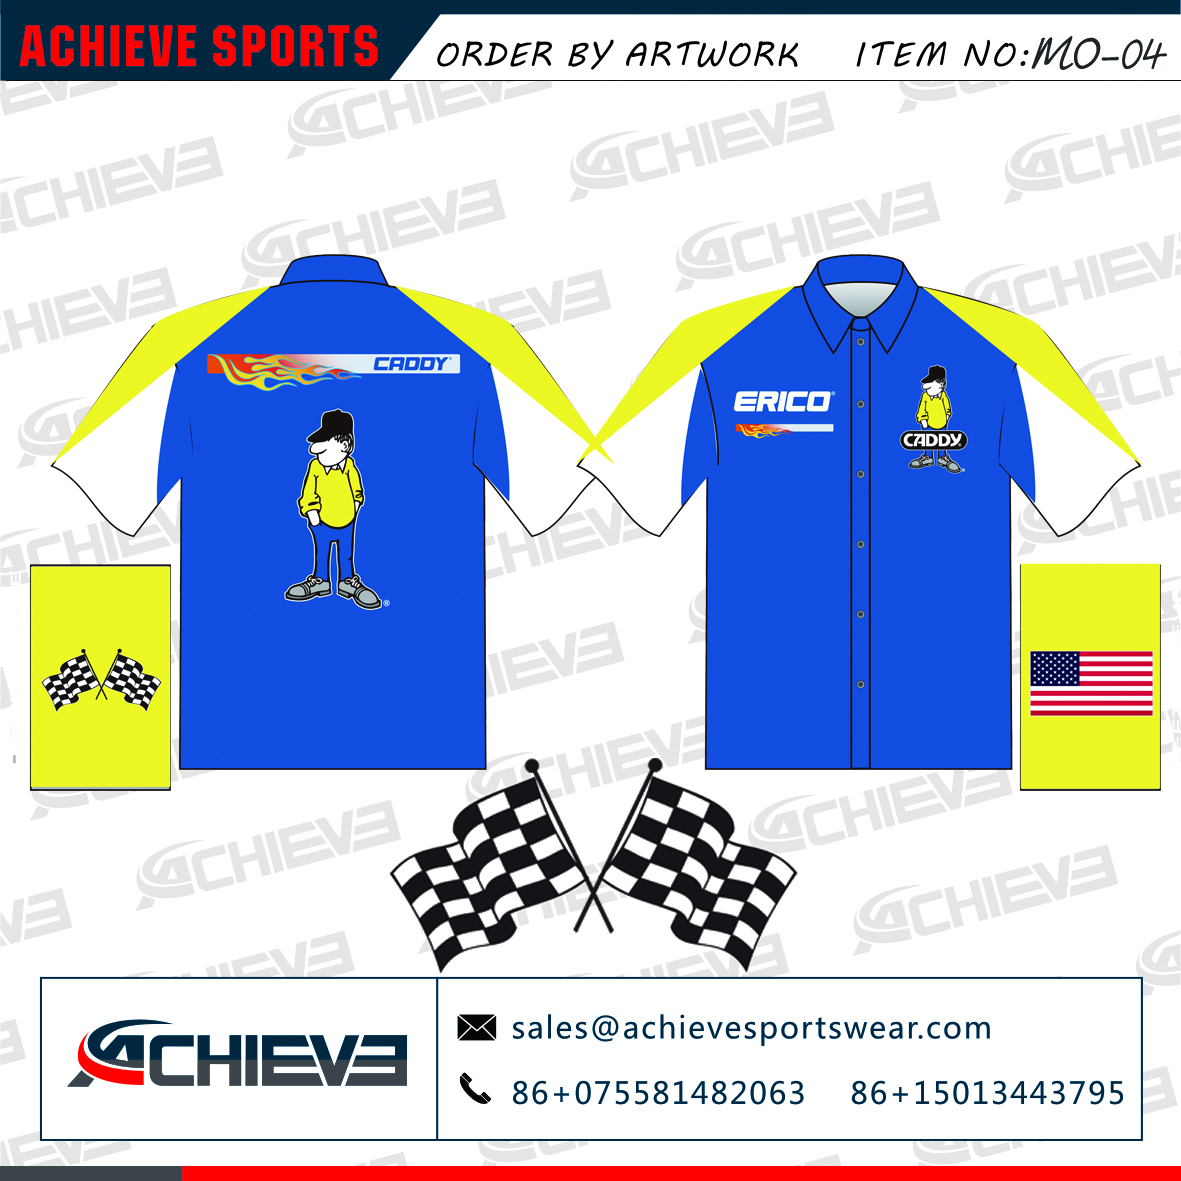 High quality 100% polyester racing jerseys